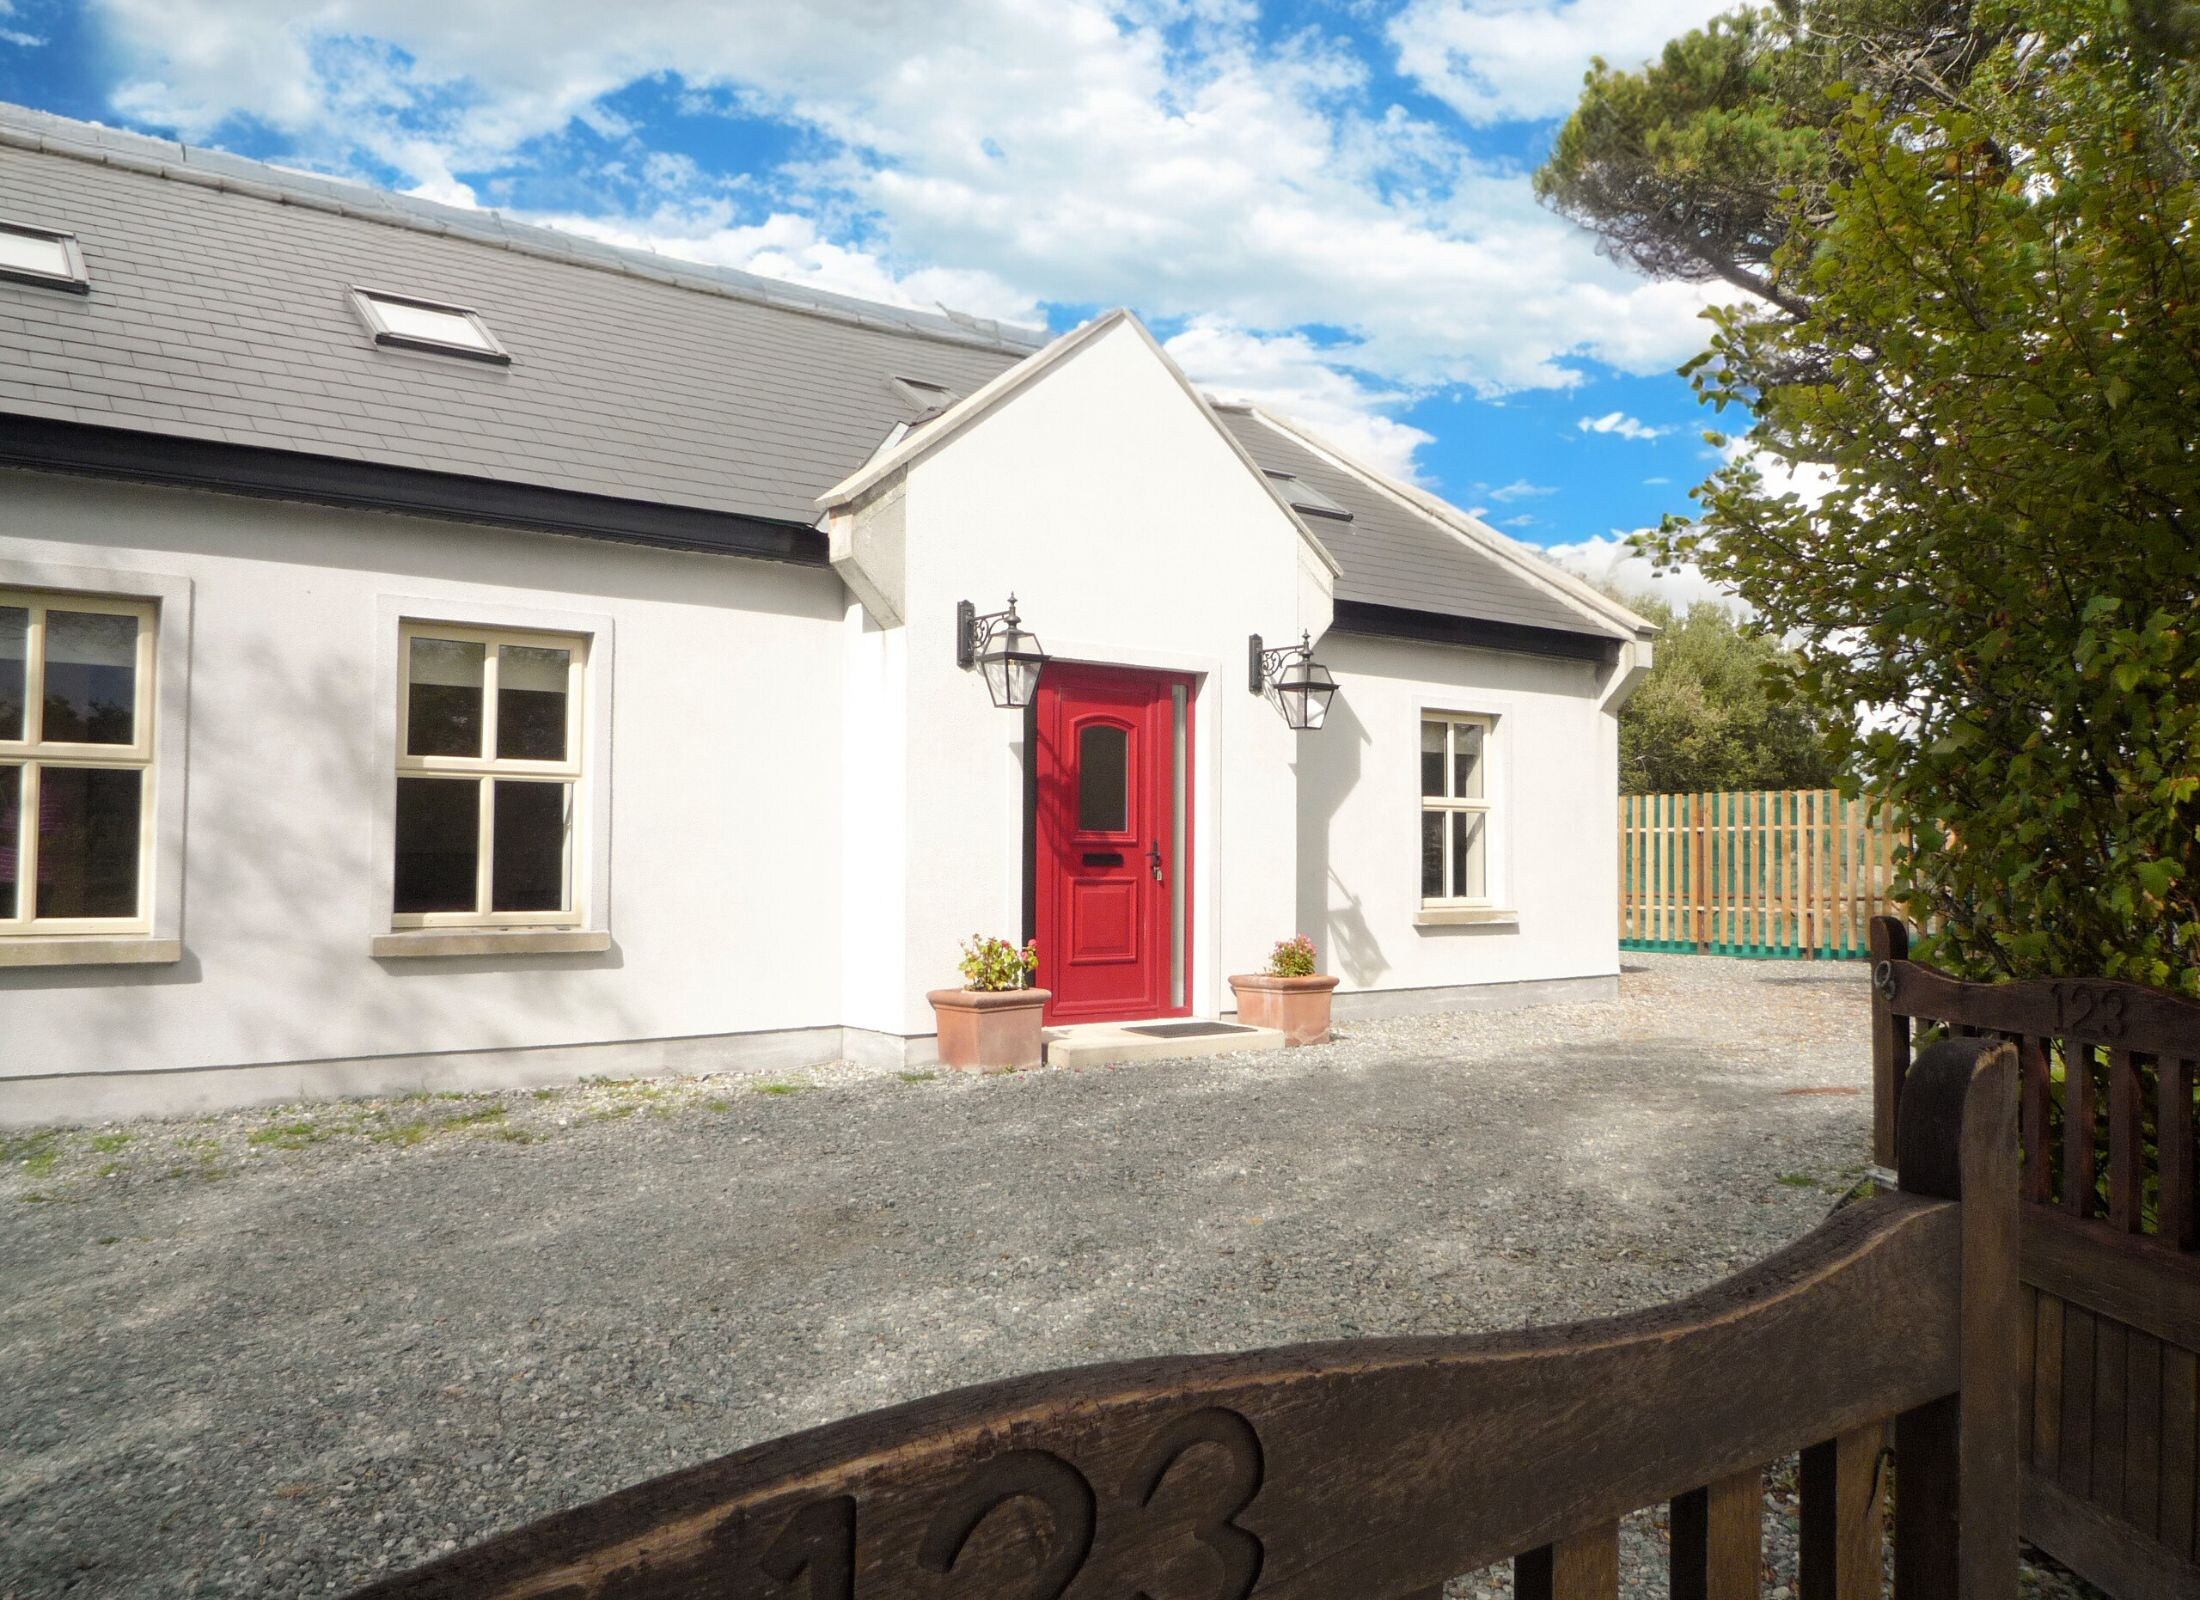 Tí Mhaggie, Luxury Holiday Accommodation Available in near Carna, Connemara, County Galway